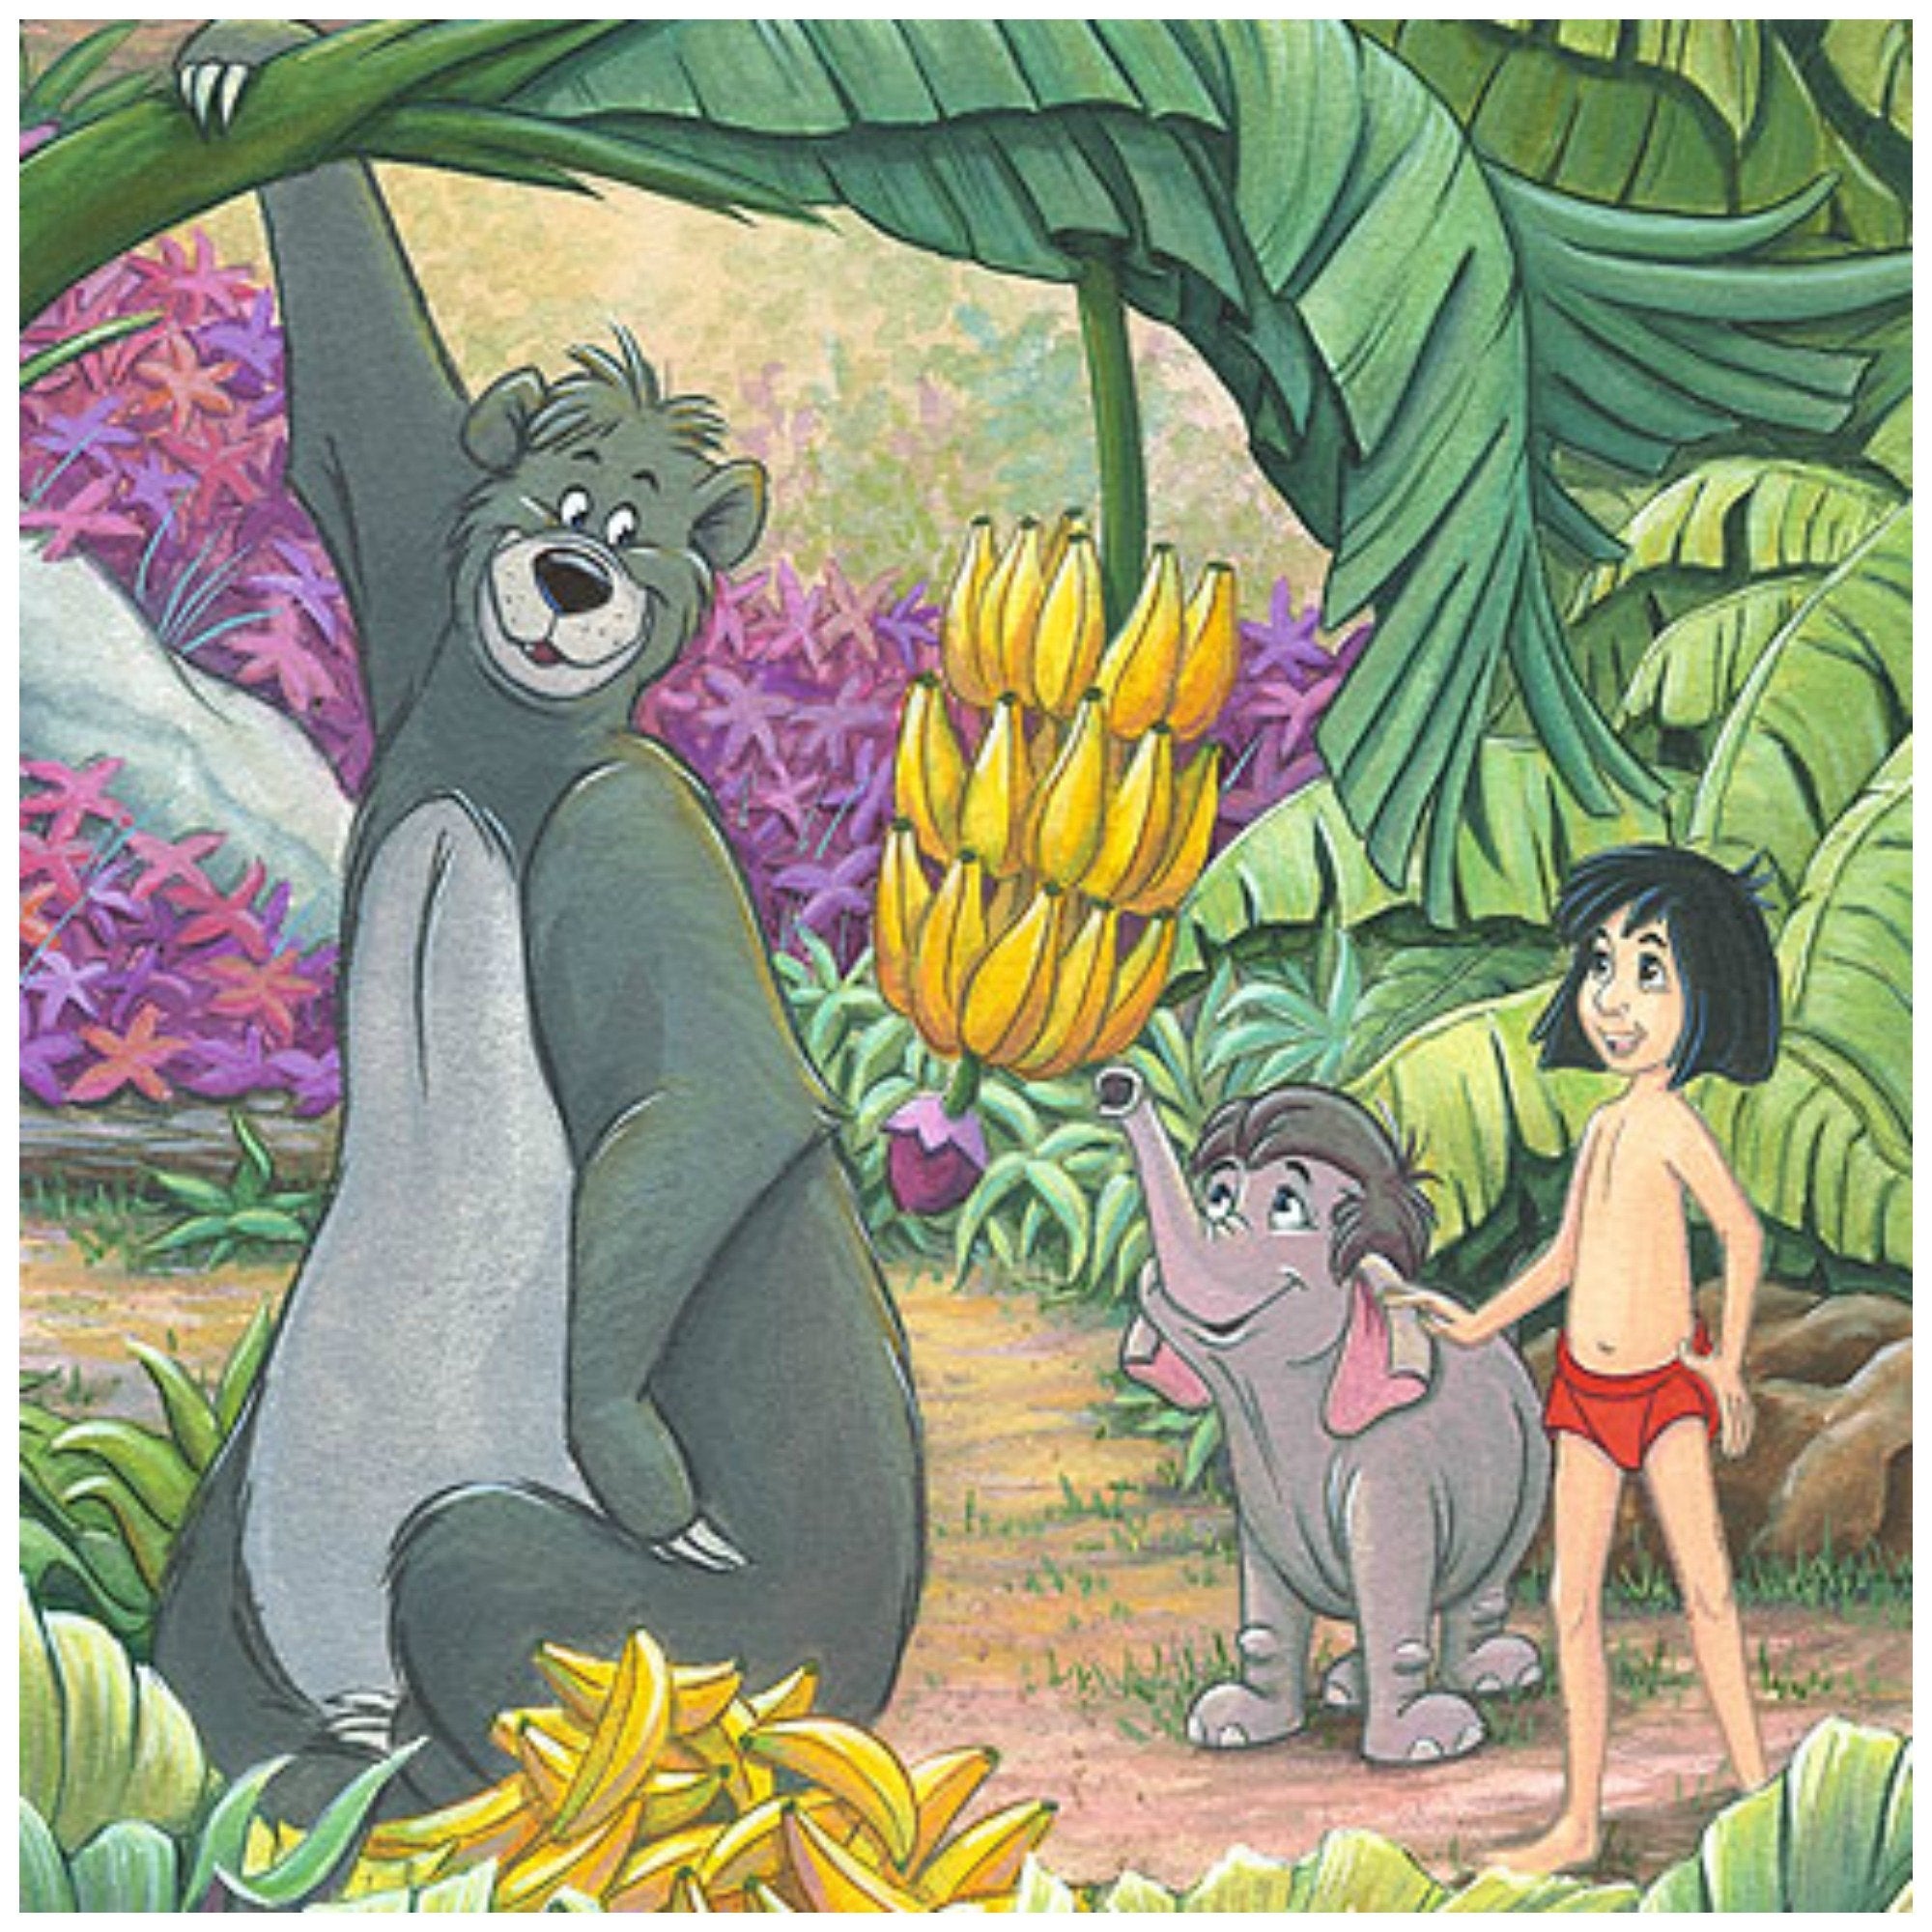 Home in the Jungle by Michelle St. Laurent.  Mowgli and Baloo help baby elephant Hathi Jr. by lowering down the hanging cluster of bananas from the bananas tree - closeup